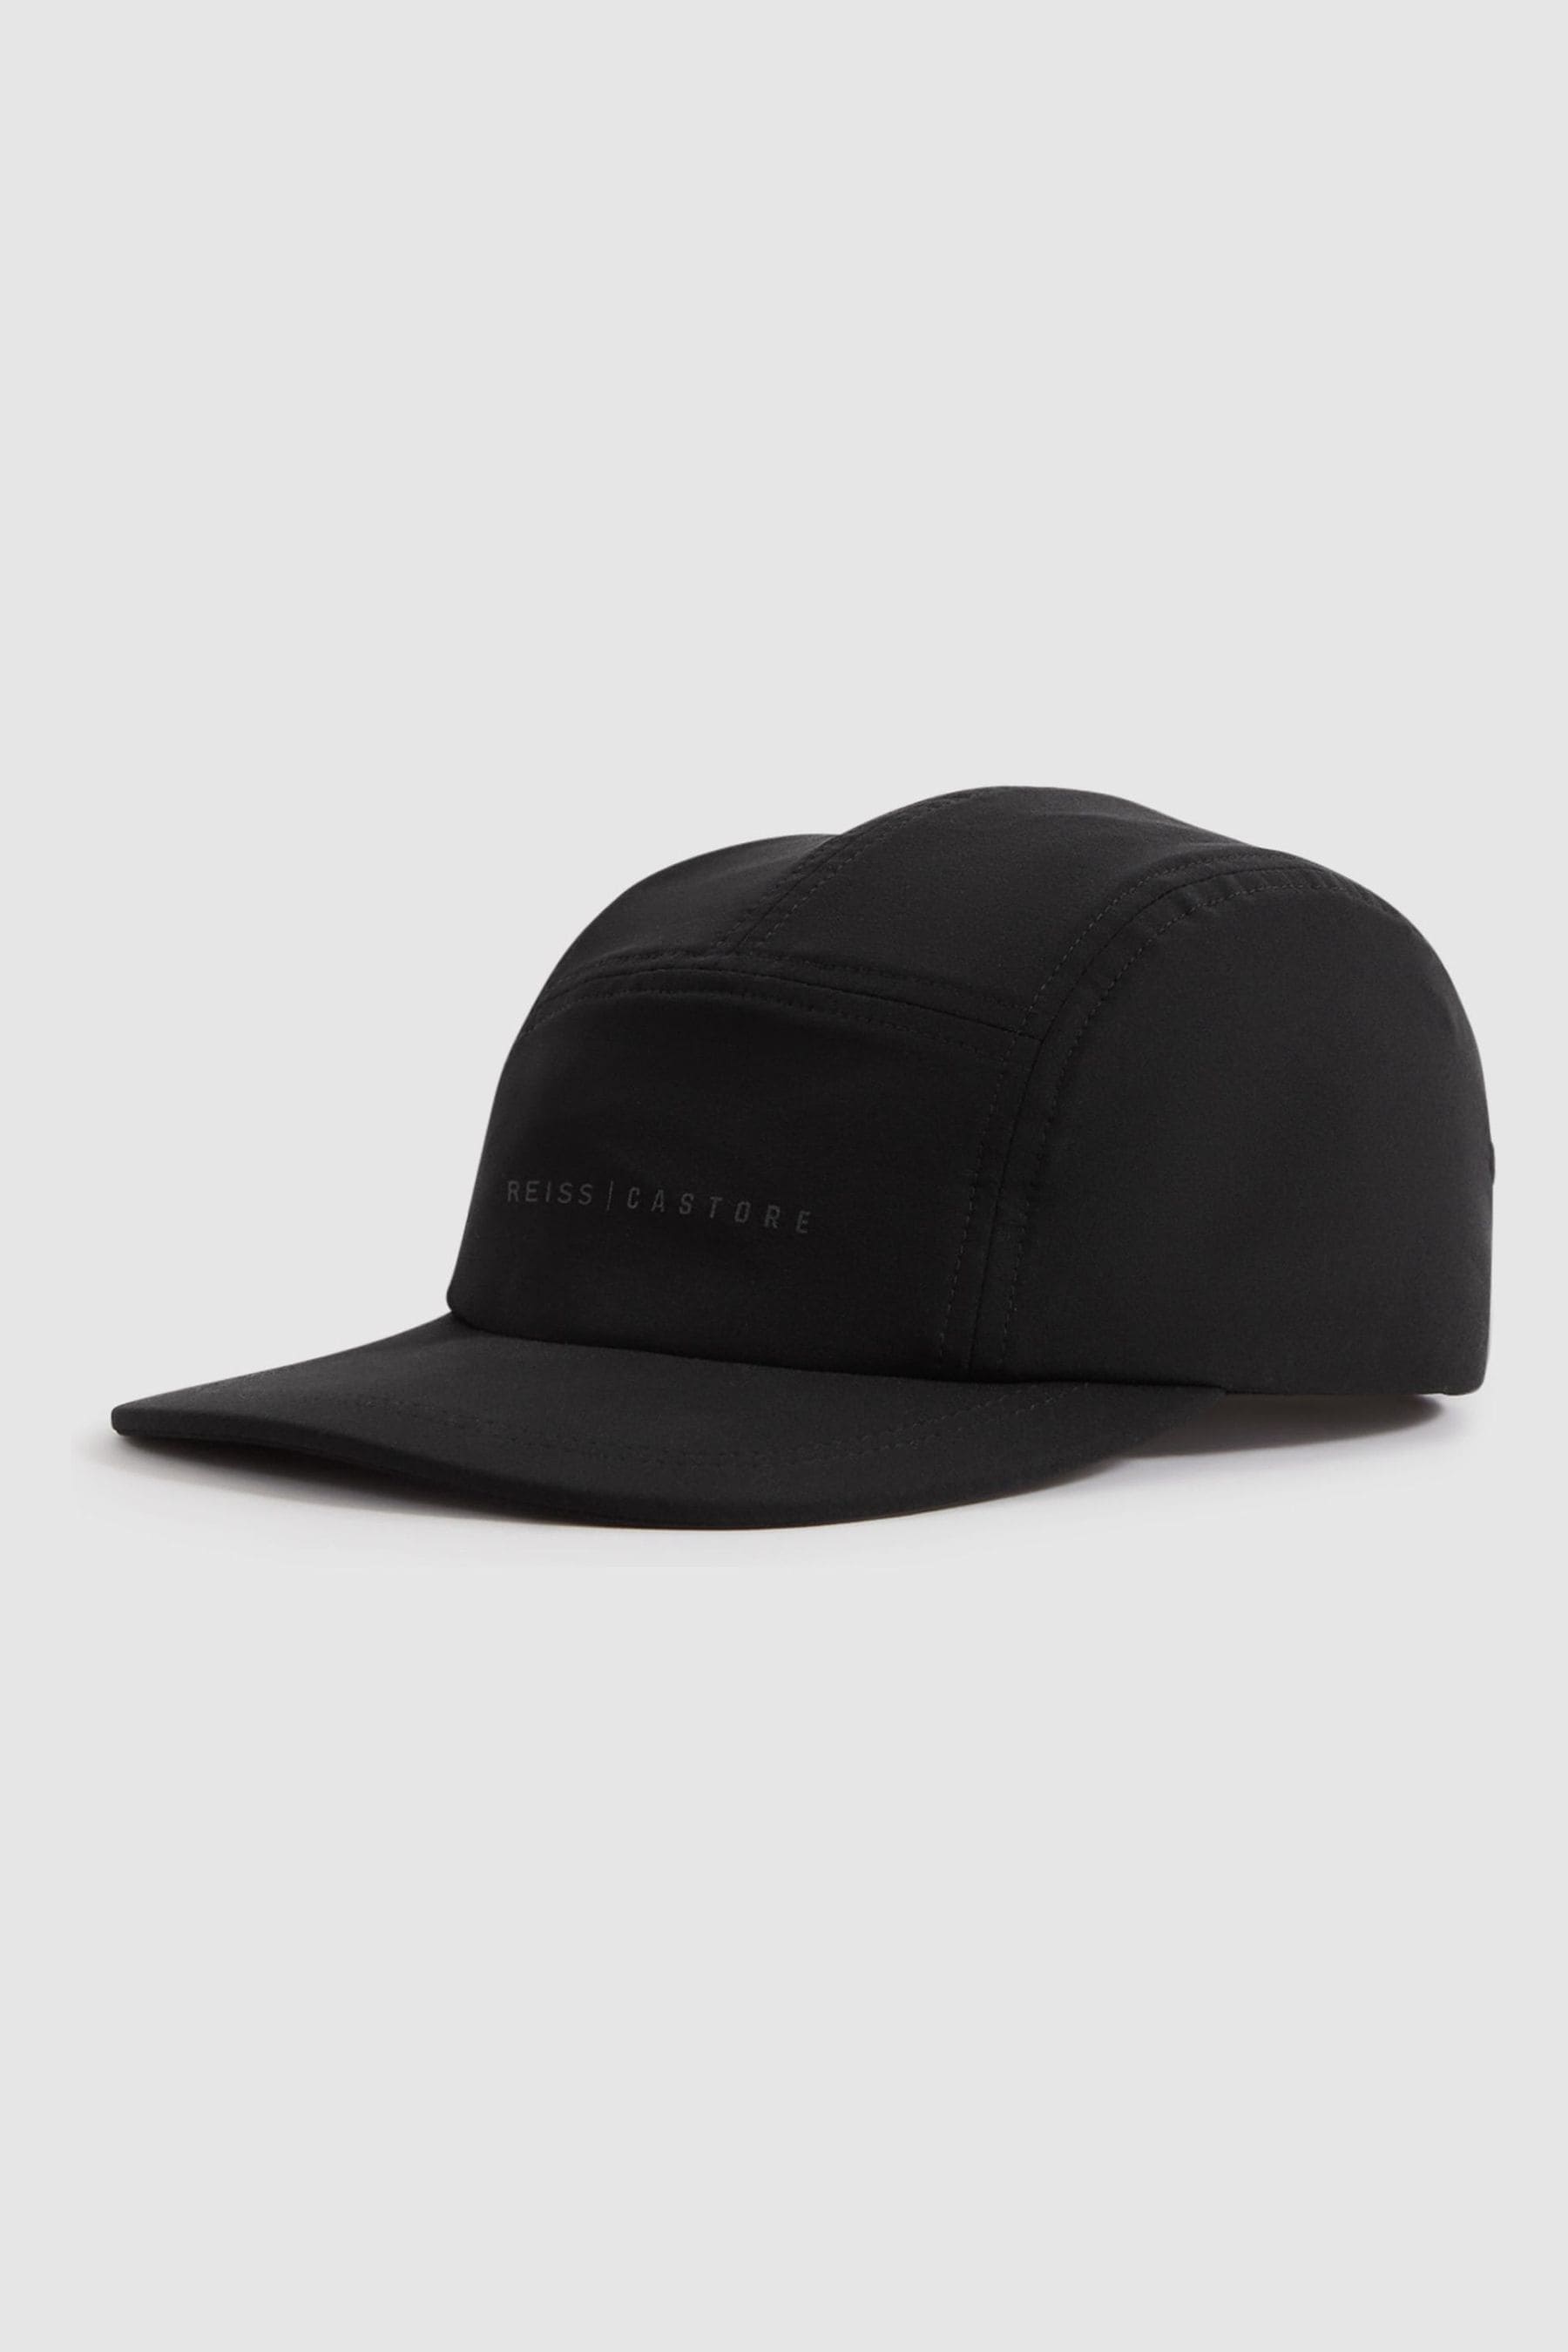 Reiss Remy - Onyx Black Castore Water Repellent Baseball Cap, In Blue